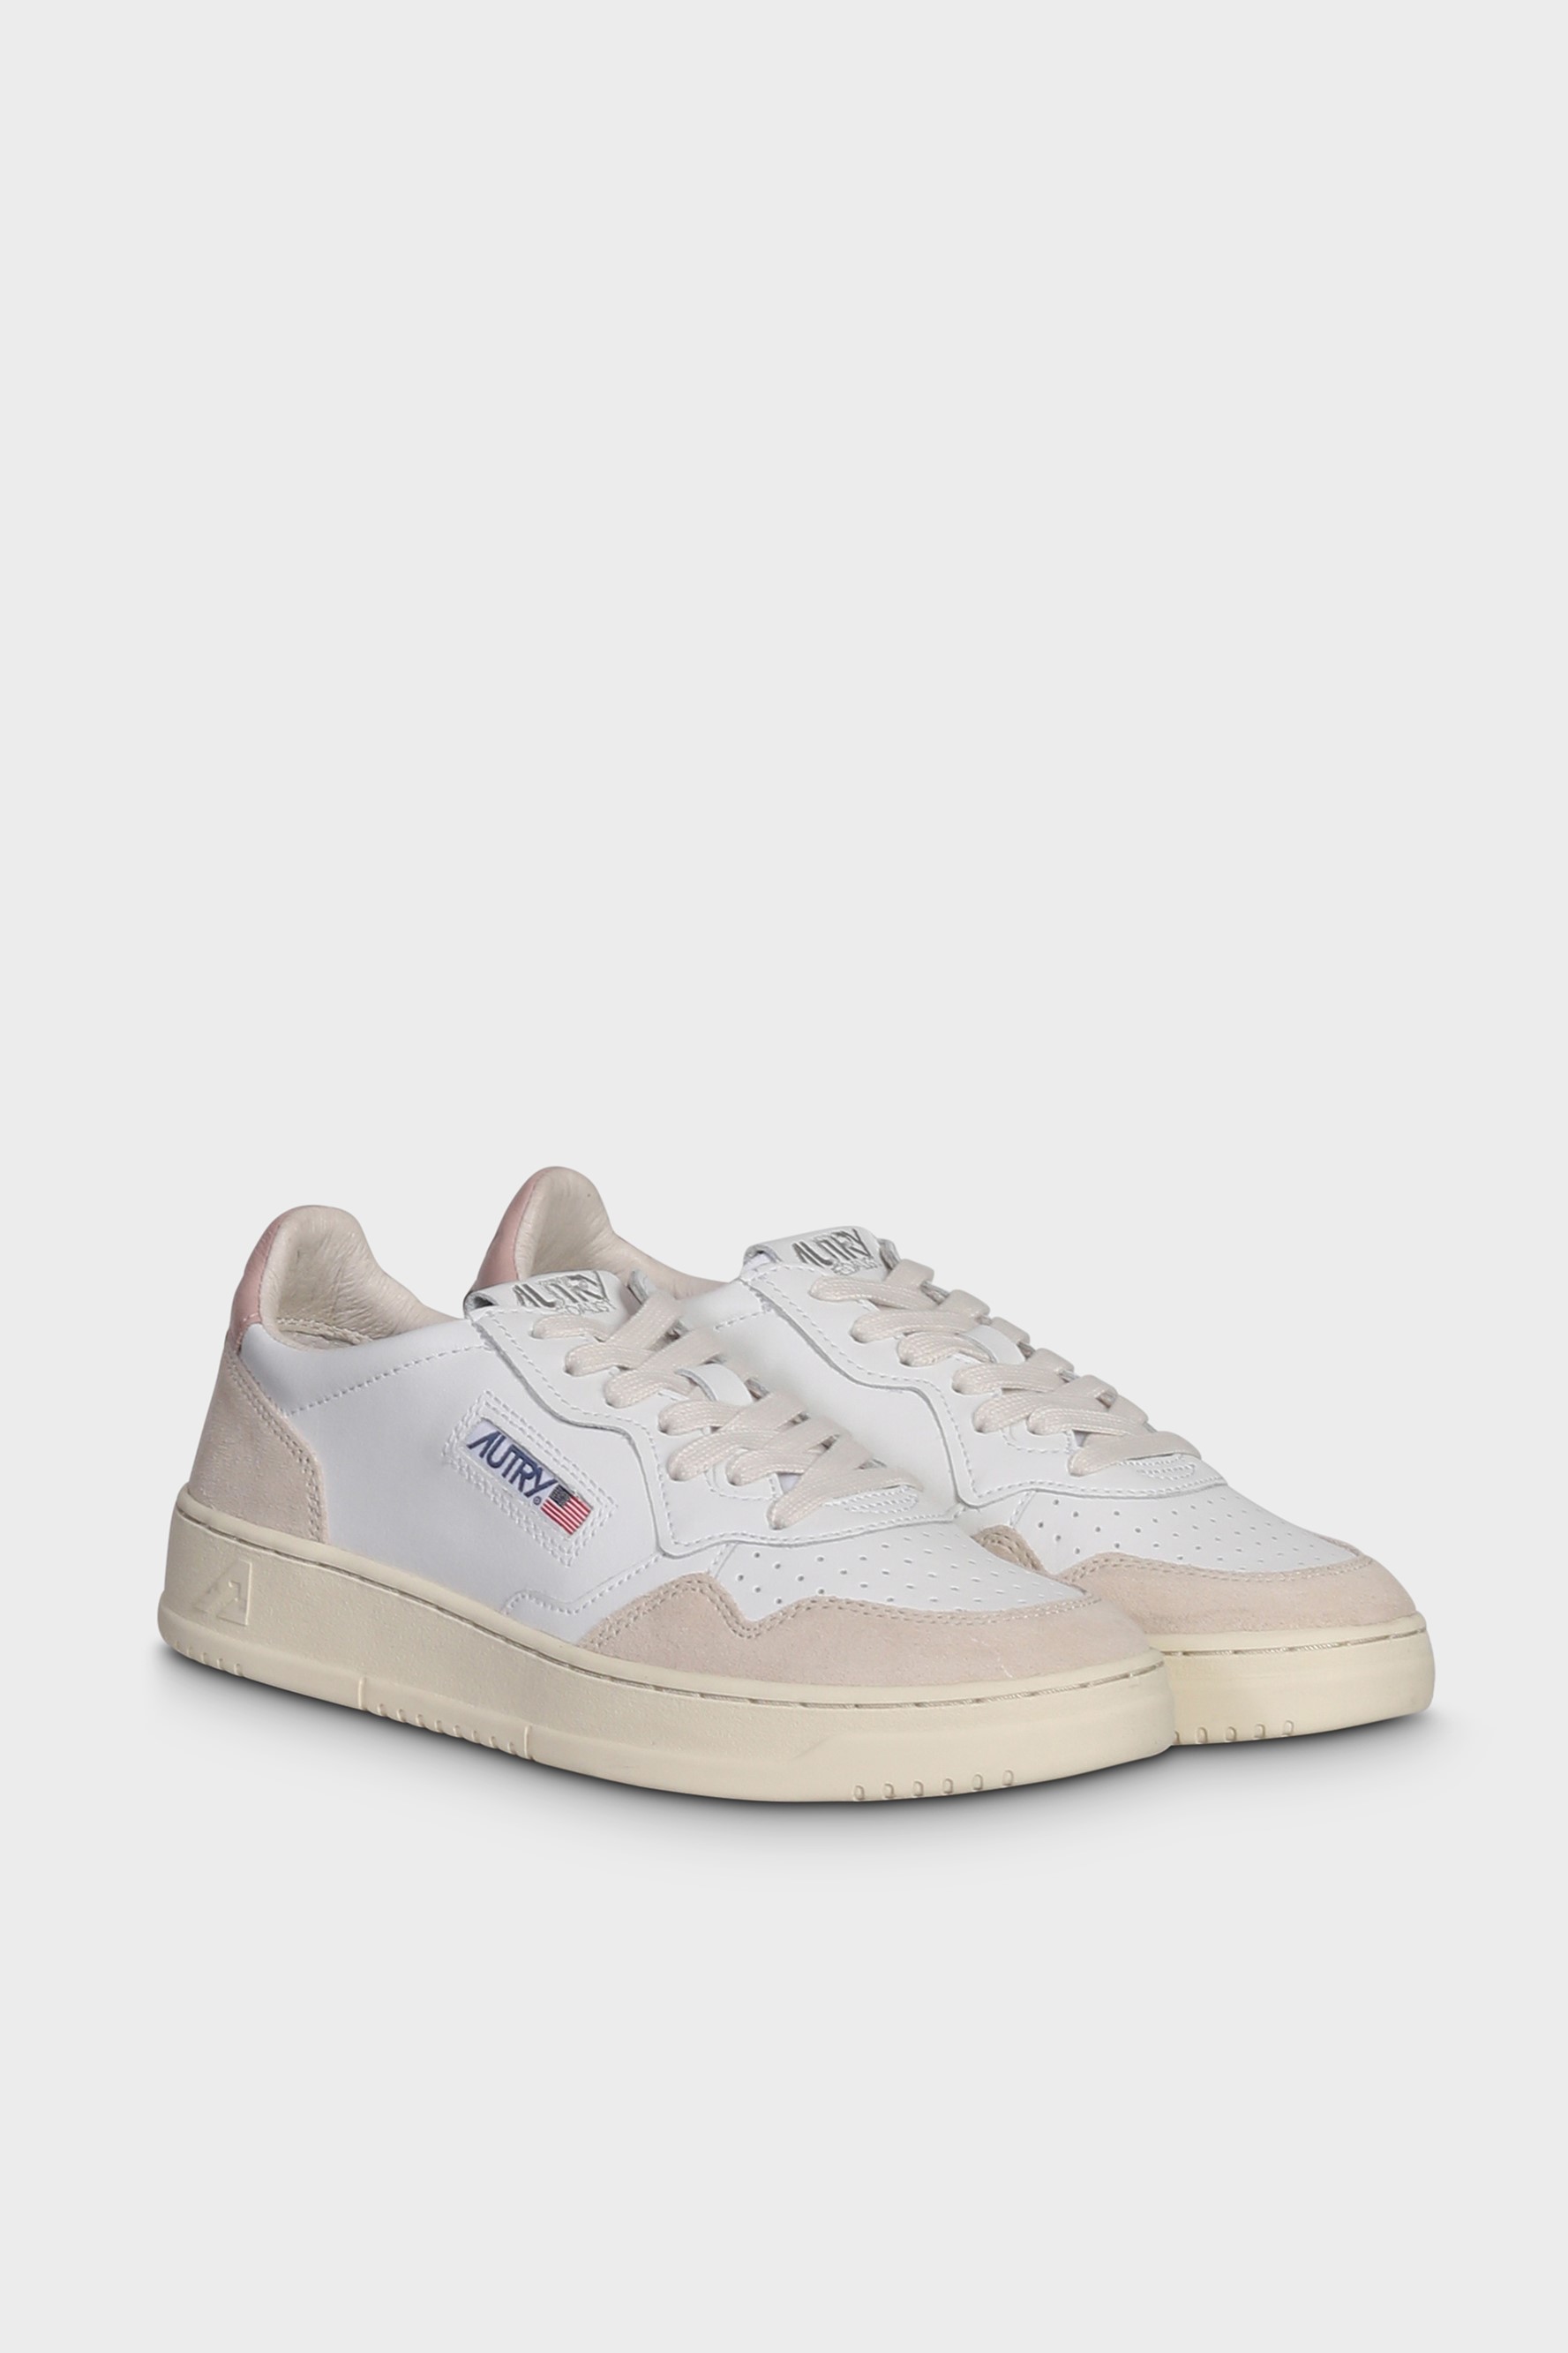 AUTRY ACTION SHOES Medalist Low Sneaker Suede White/Pow 40